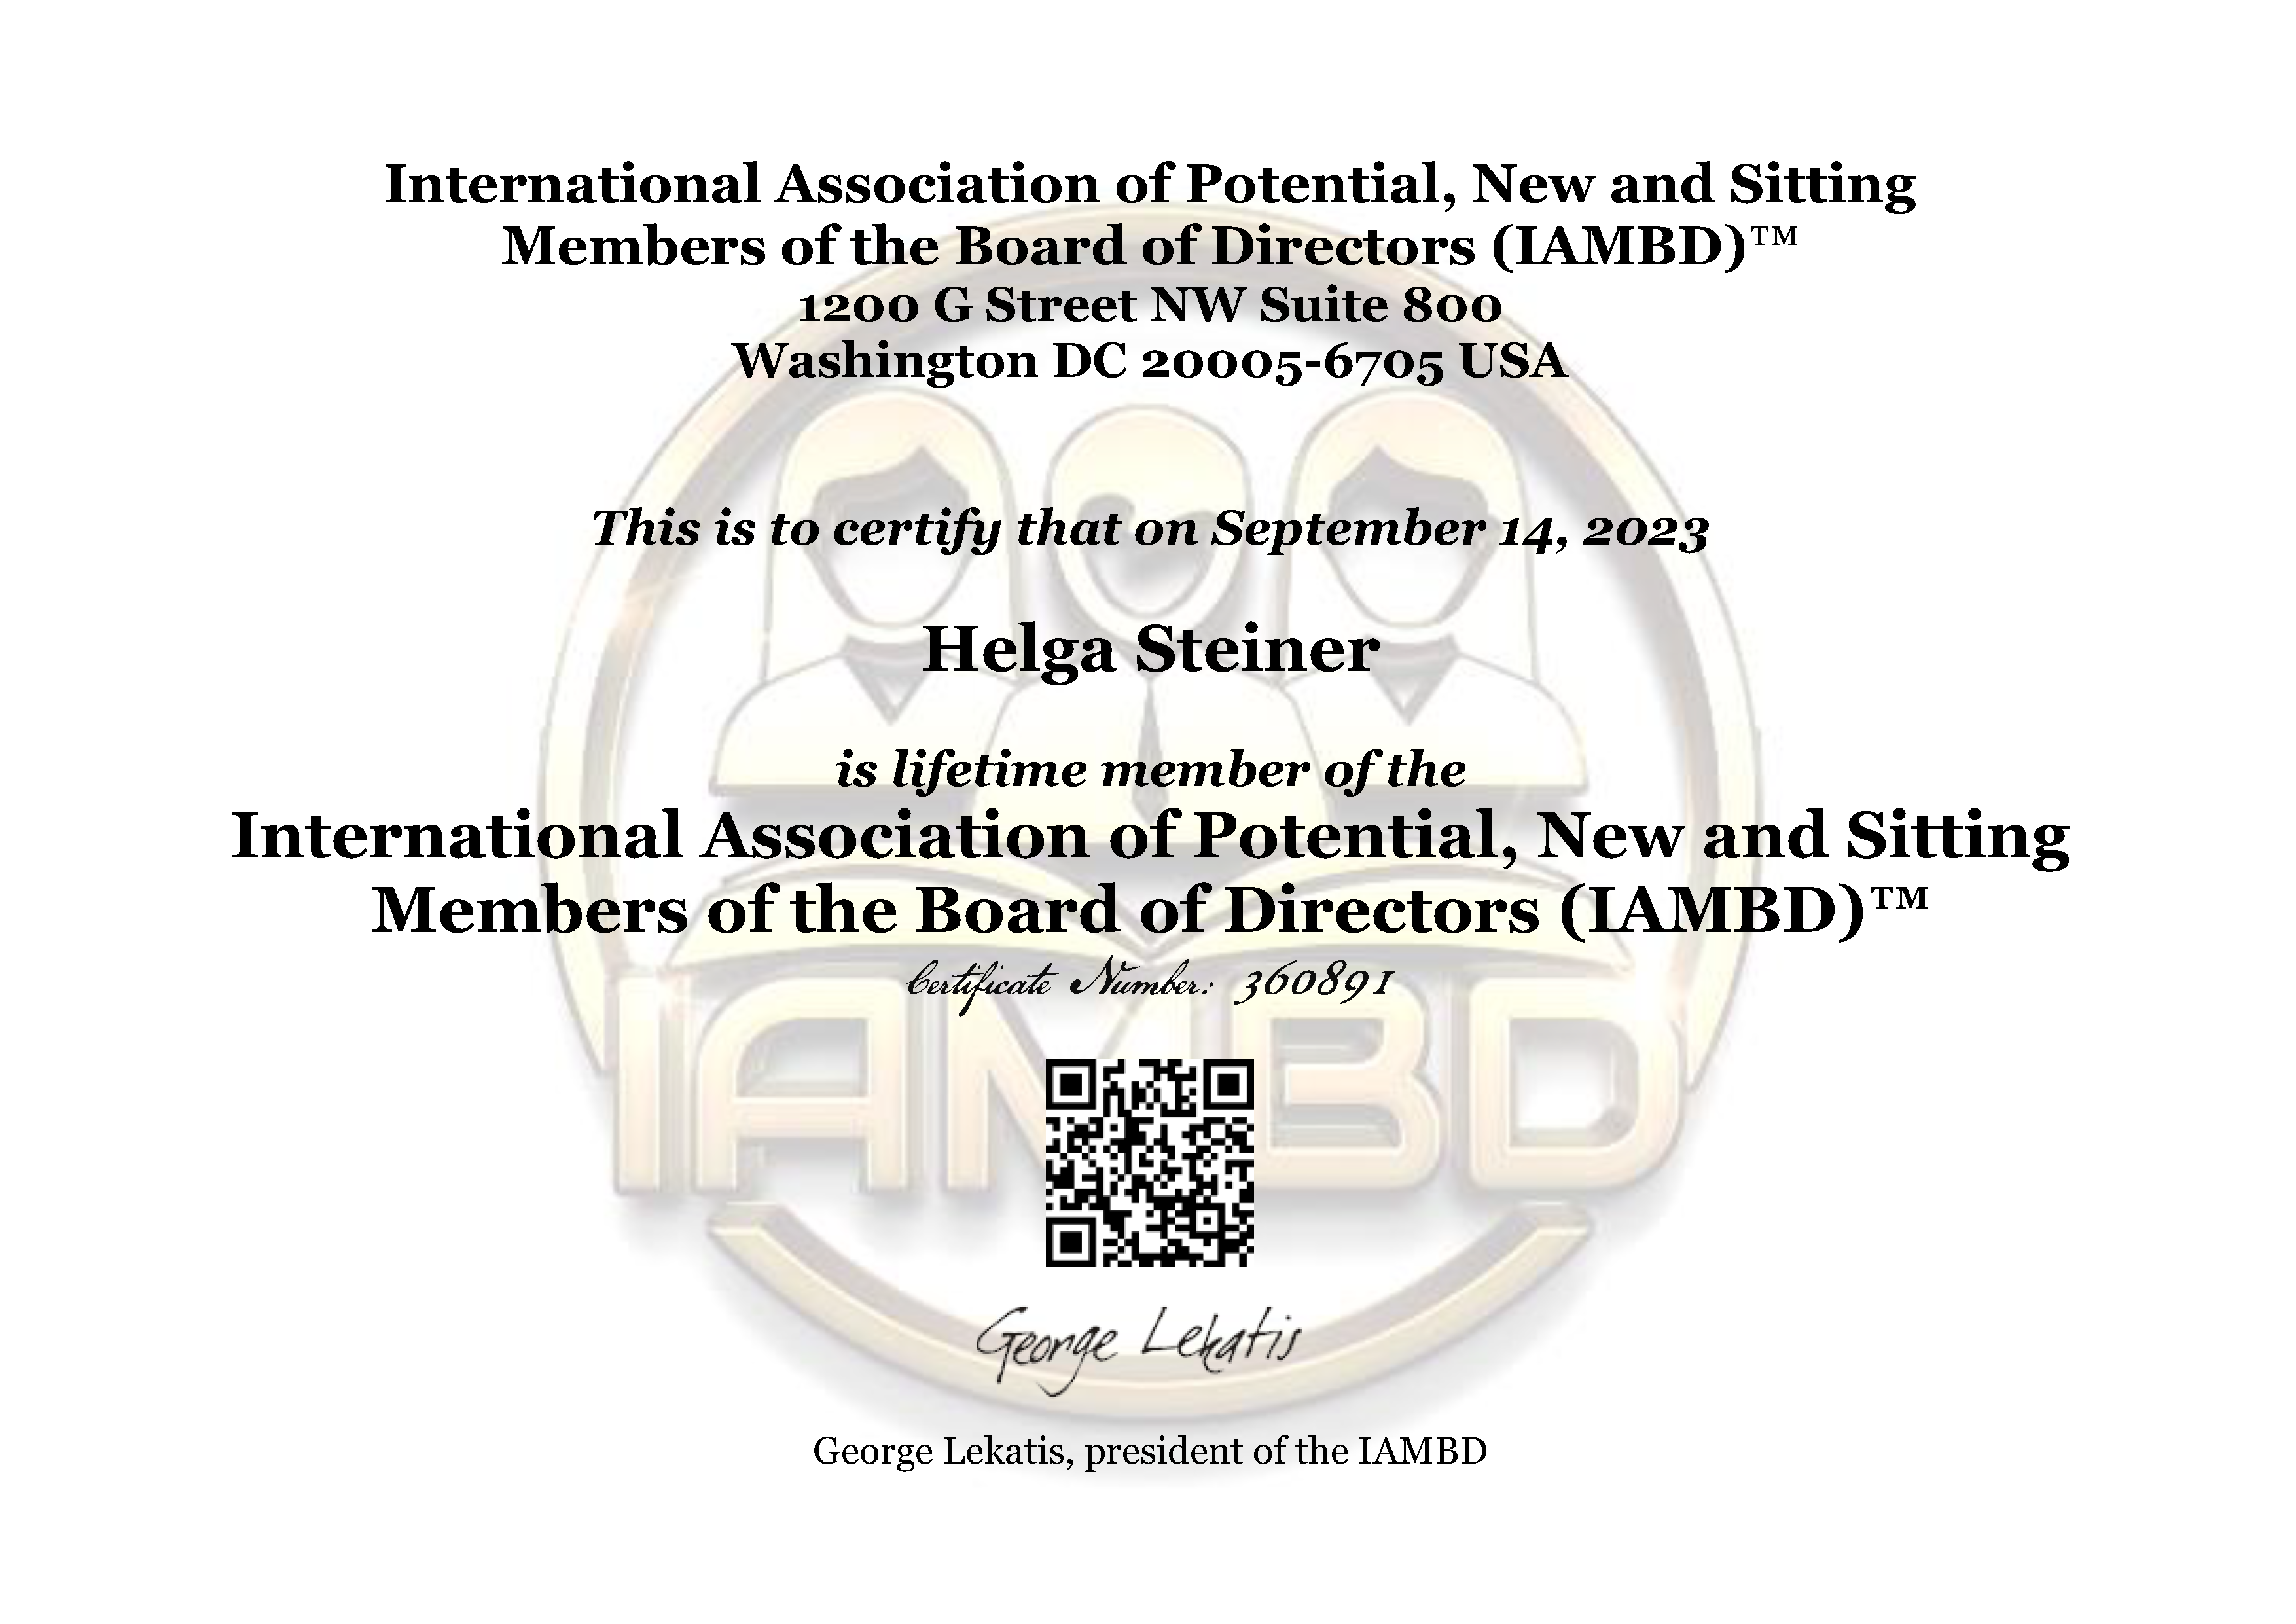 Lifetime member of the International Association of Potential, New and Sitting Members of the Board of Directors (IAMBD)